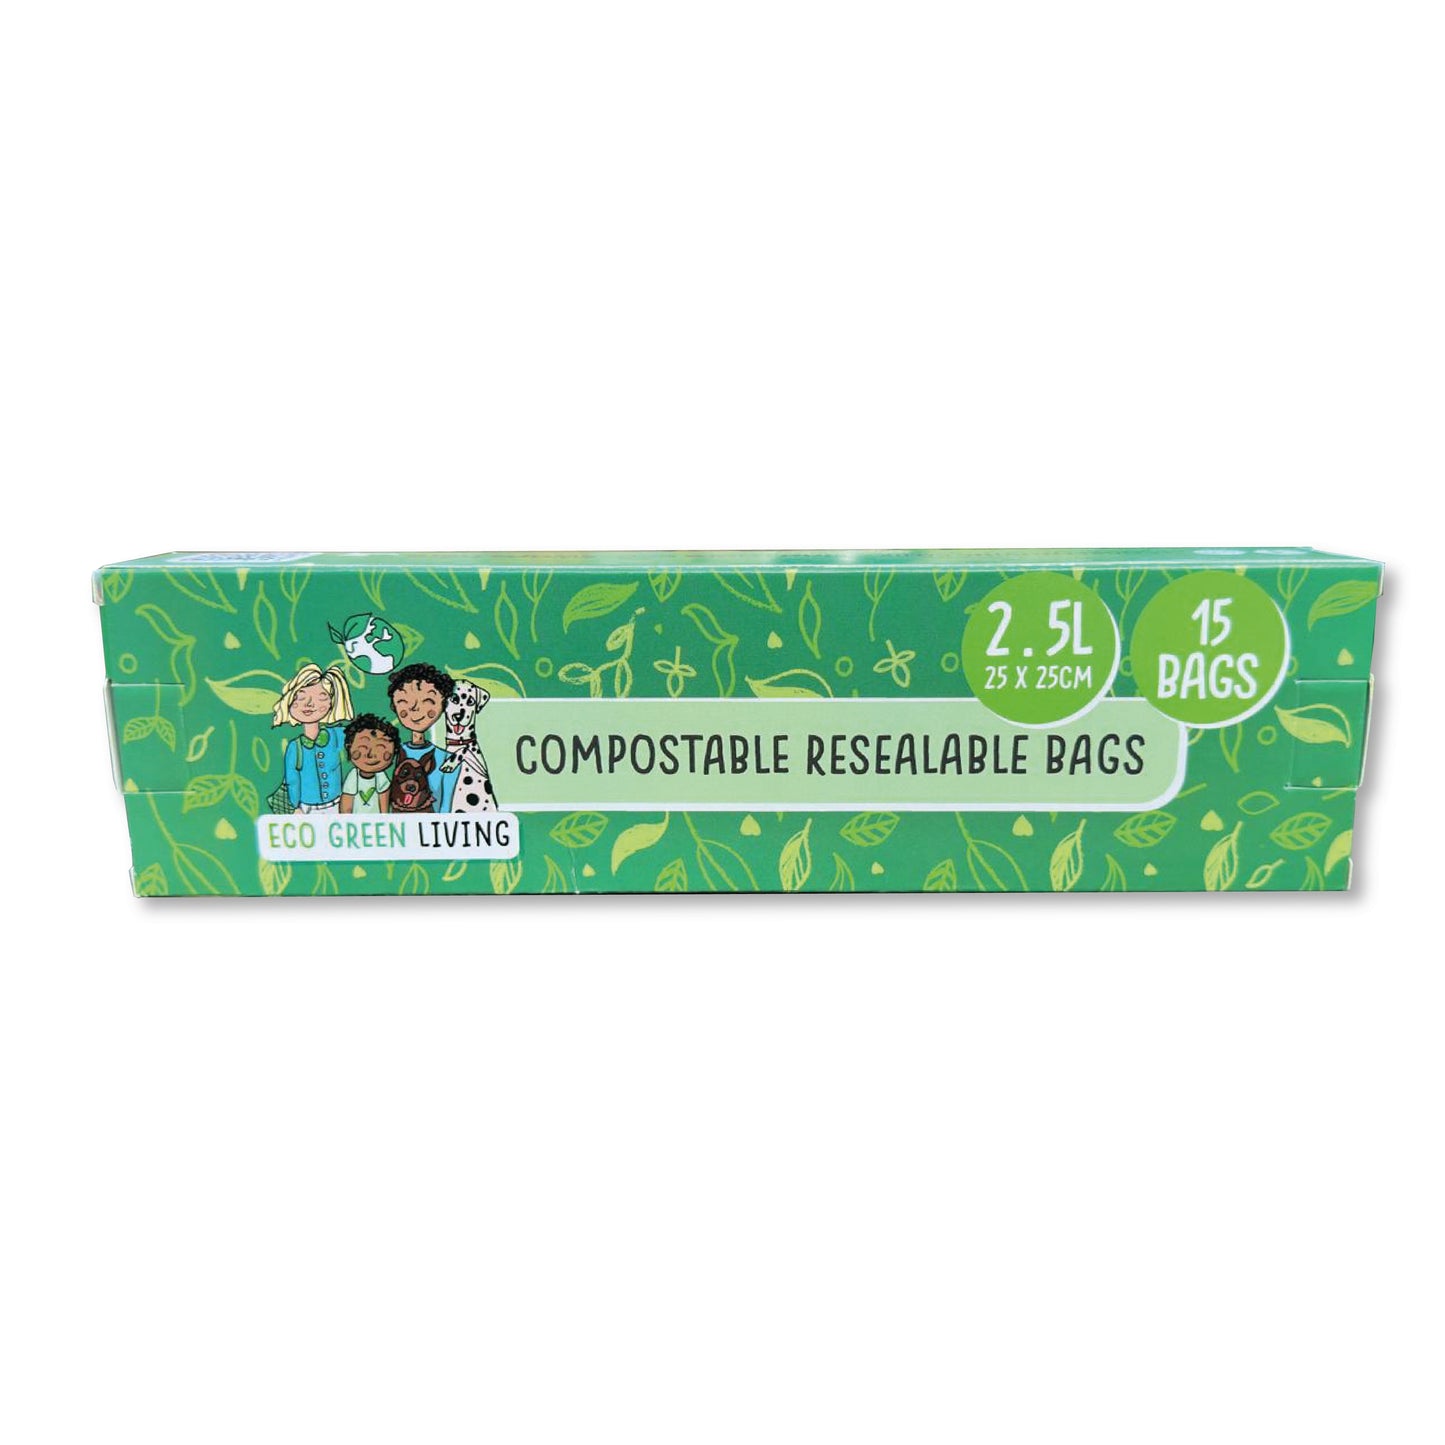 Compostable Resealable Zip lock Bags Large | 2.5 Litre (15 bags) - EcoGreenLiving